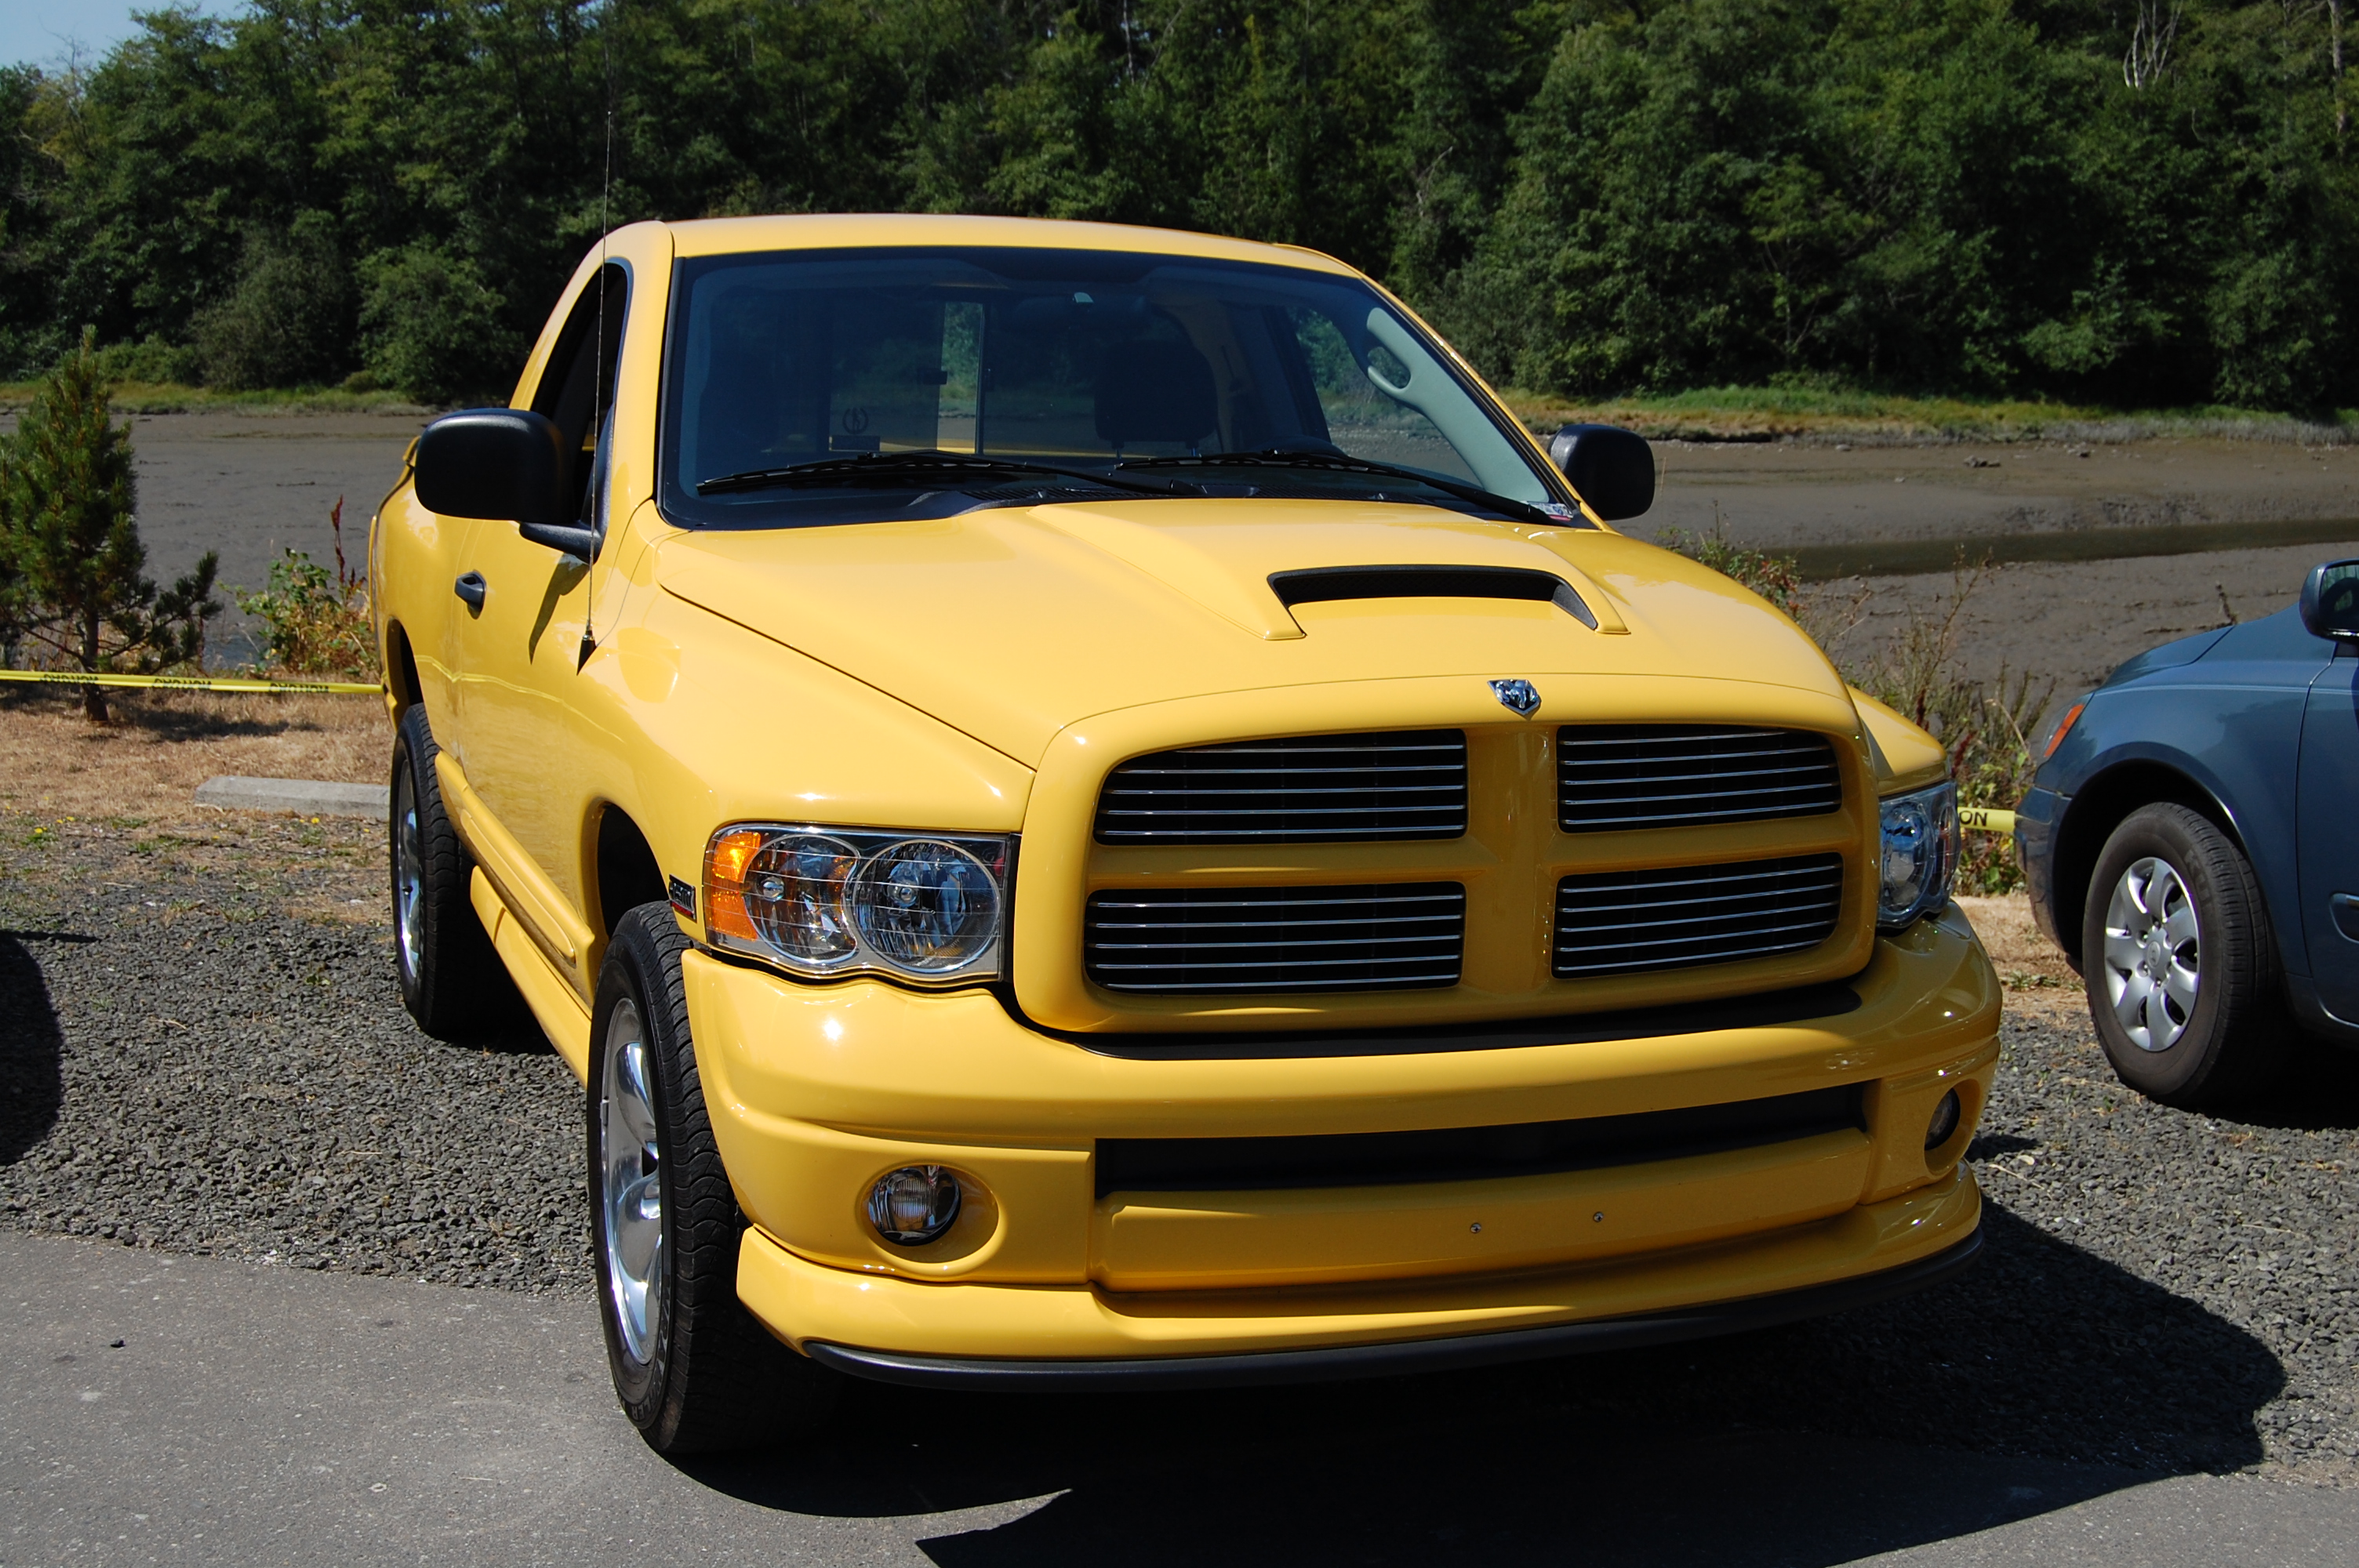 Dodge Rumble Bee | Flickr - Photo Sharing!